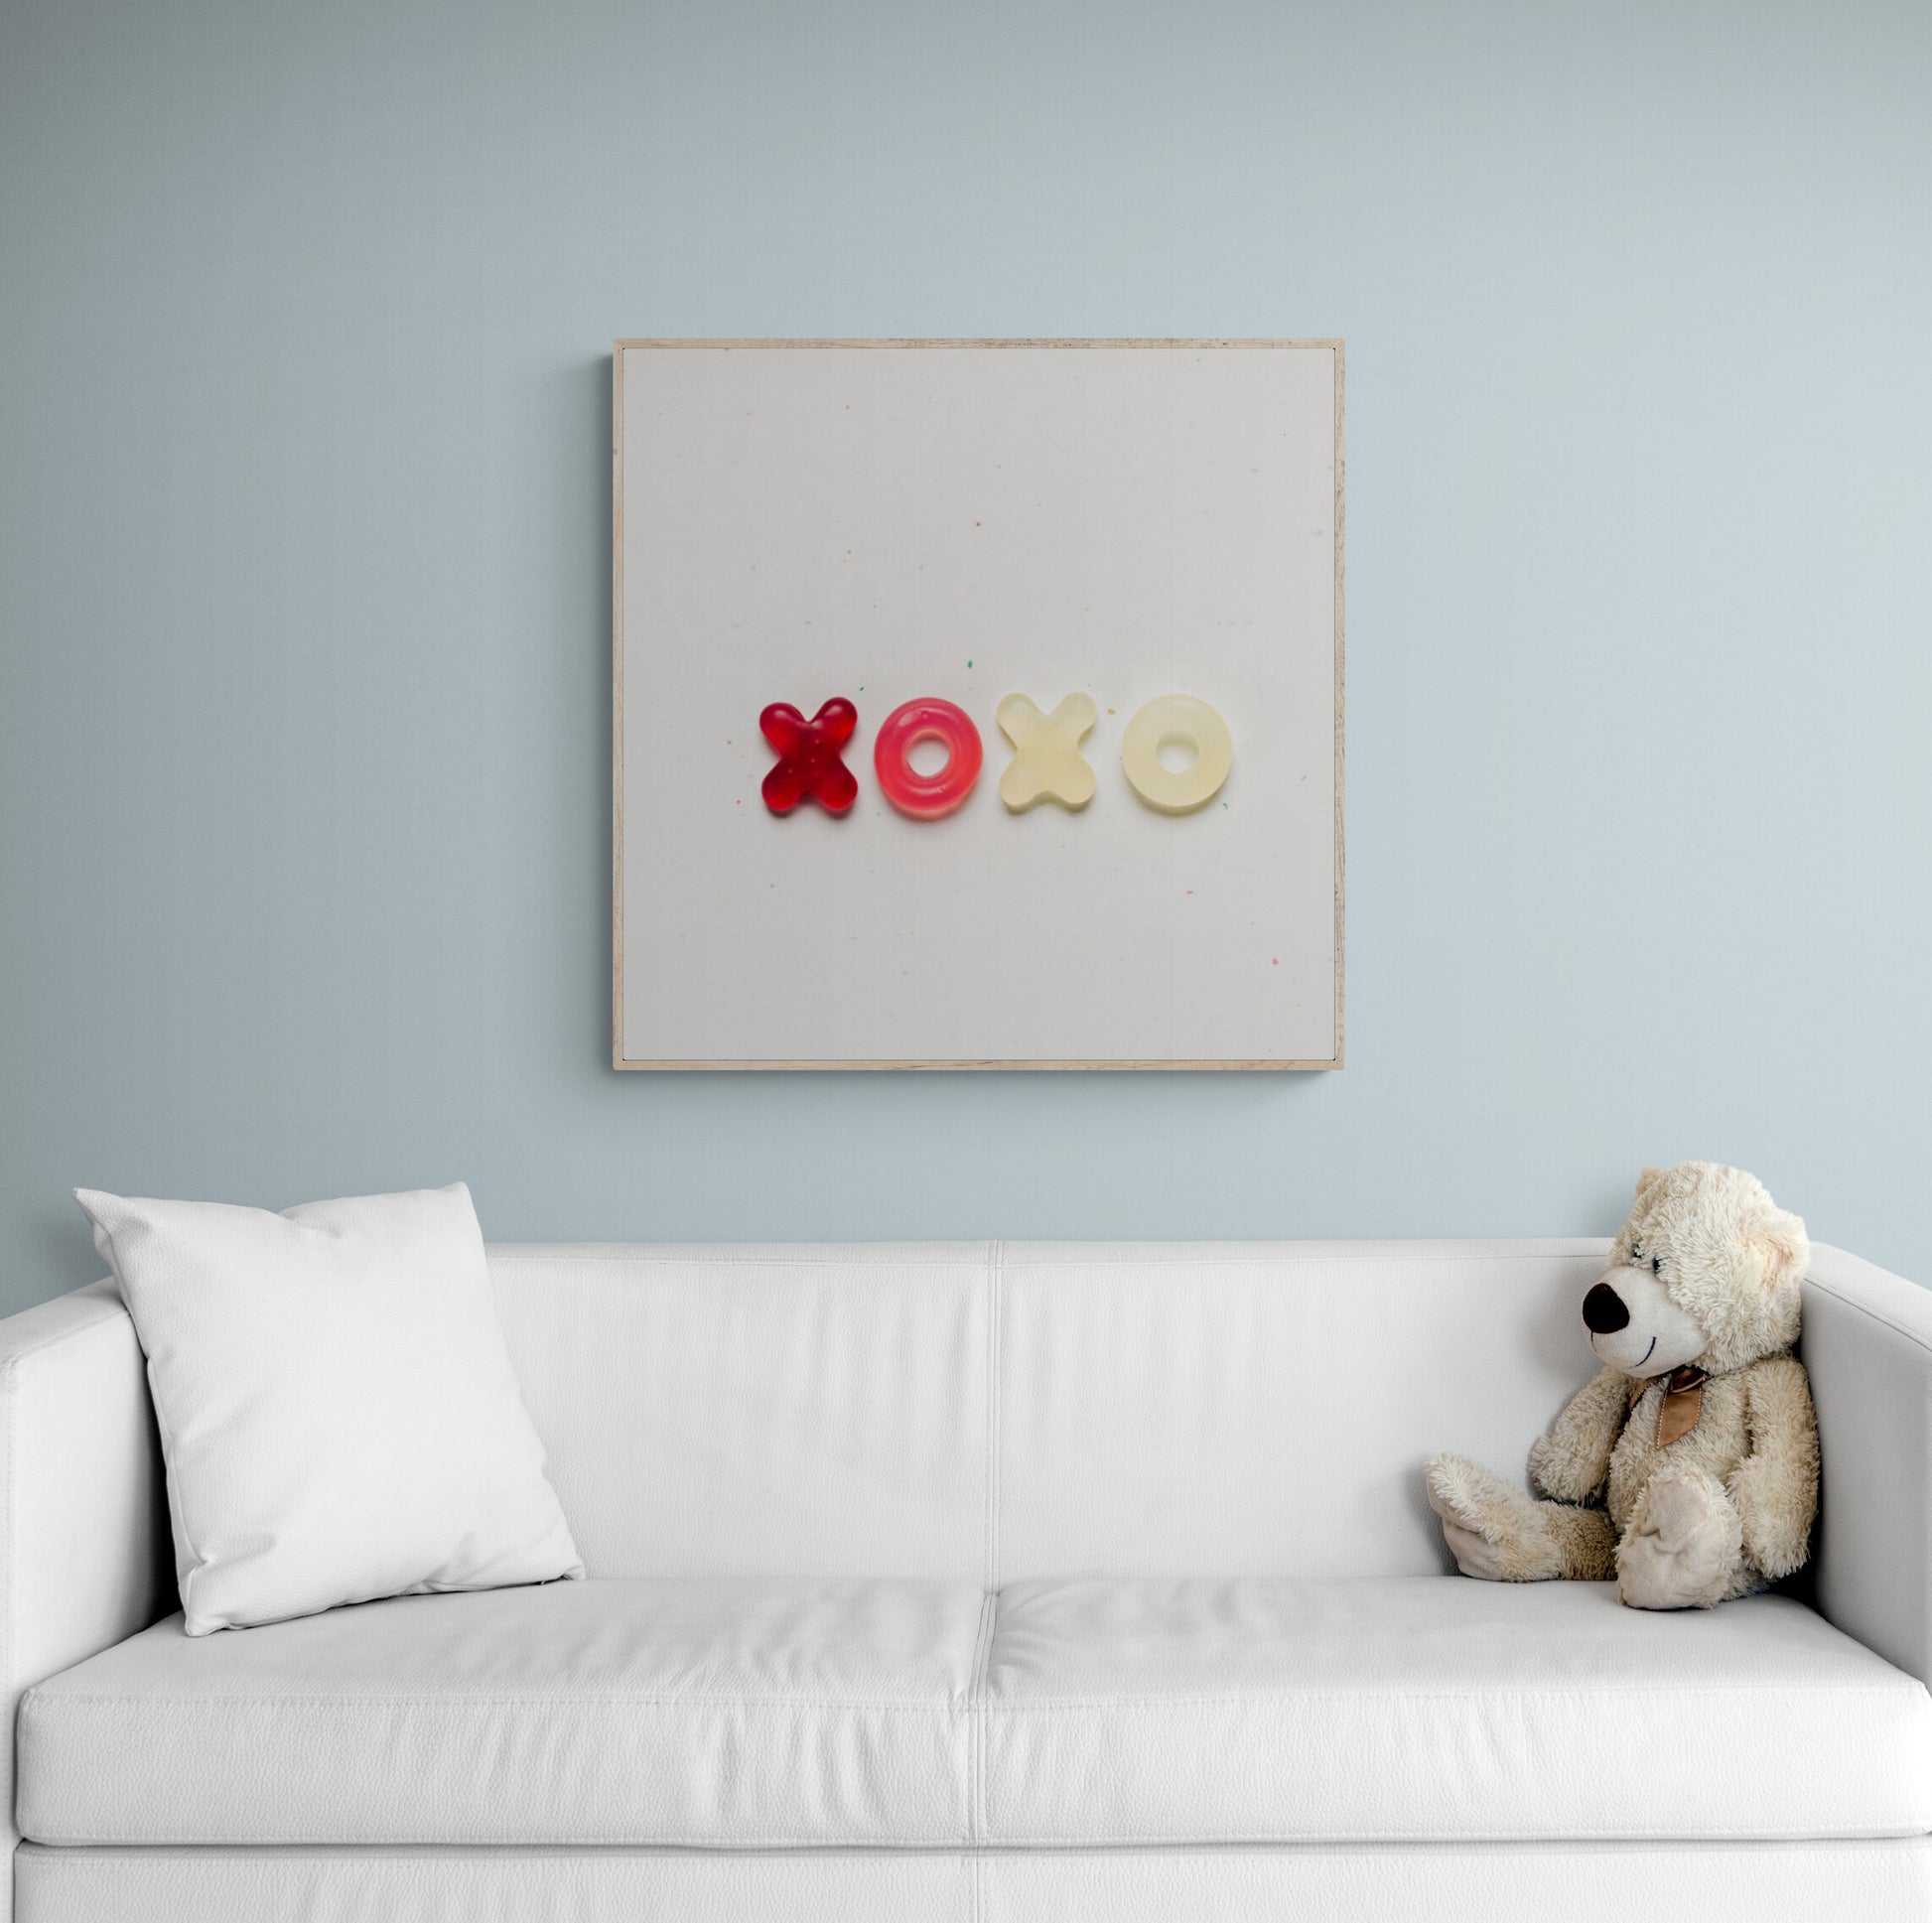 XOXO Photograph as Wall Art in a Kids Room